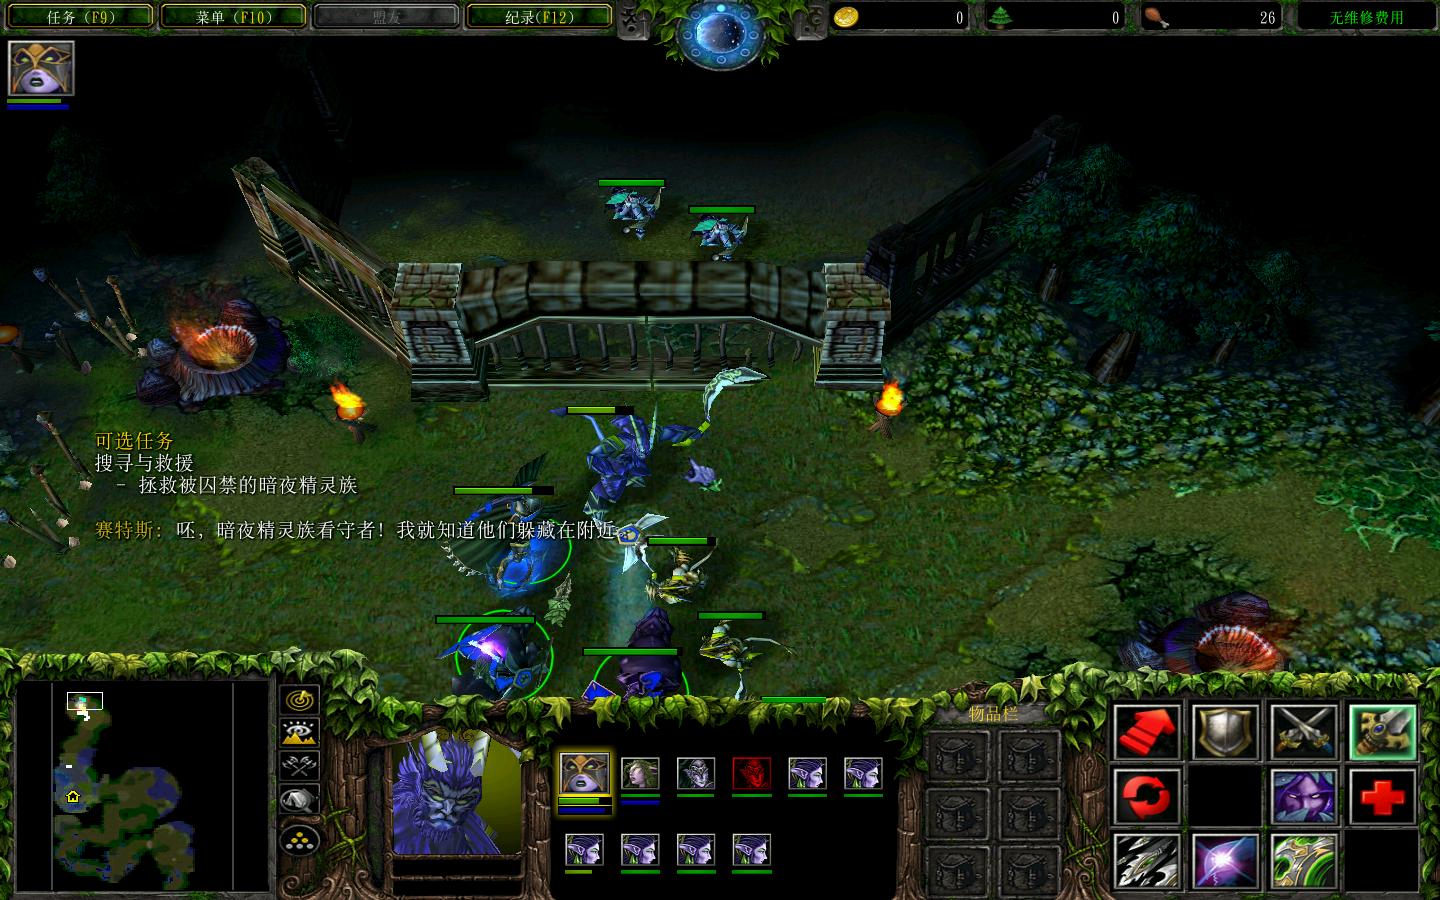 ħ3Warcraft III The Frozen Thronev1.24Ԫv1.18